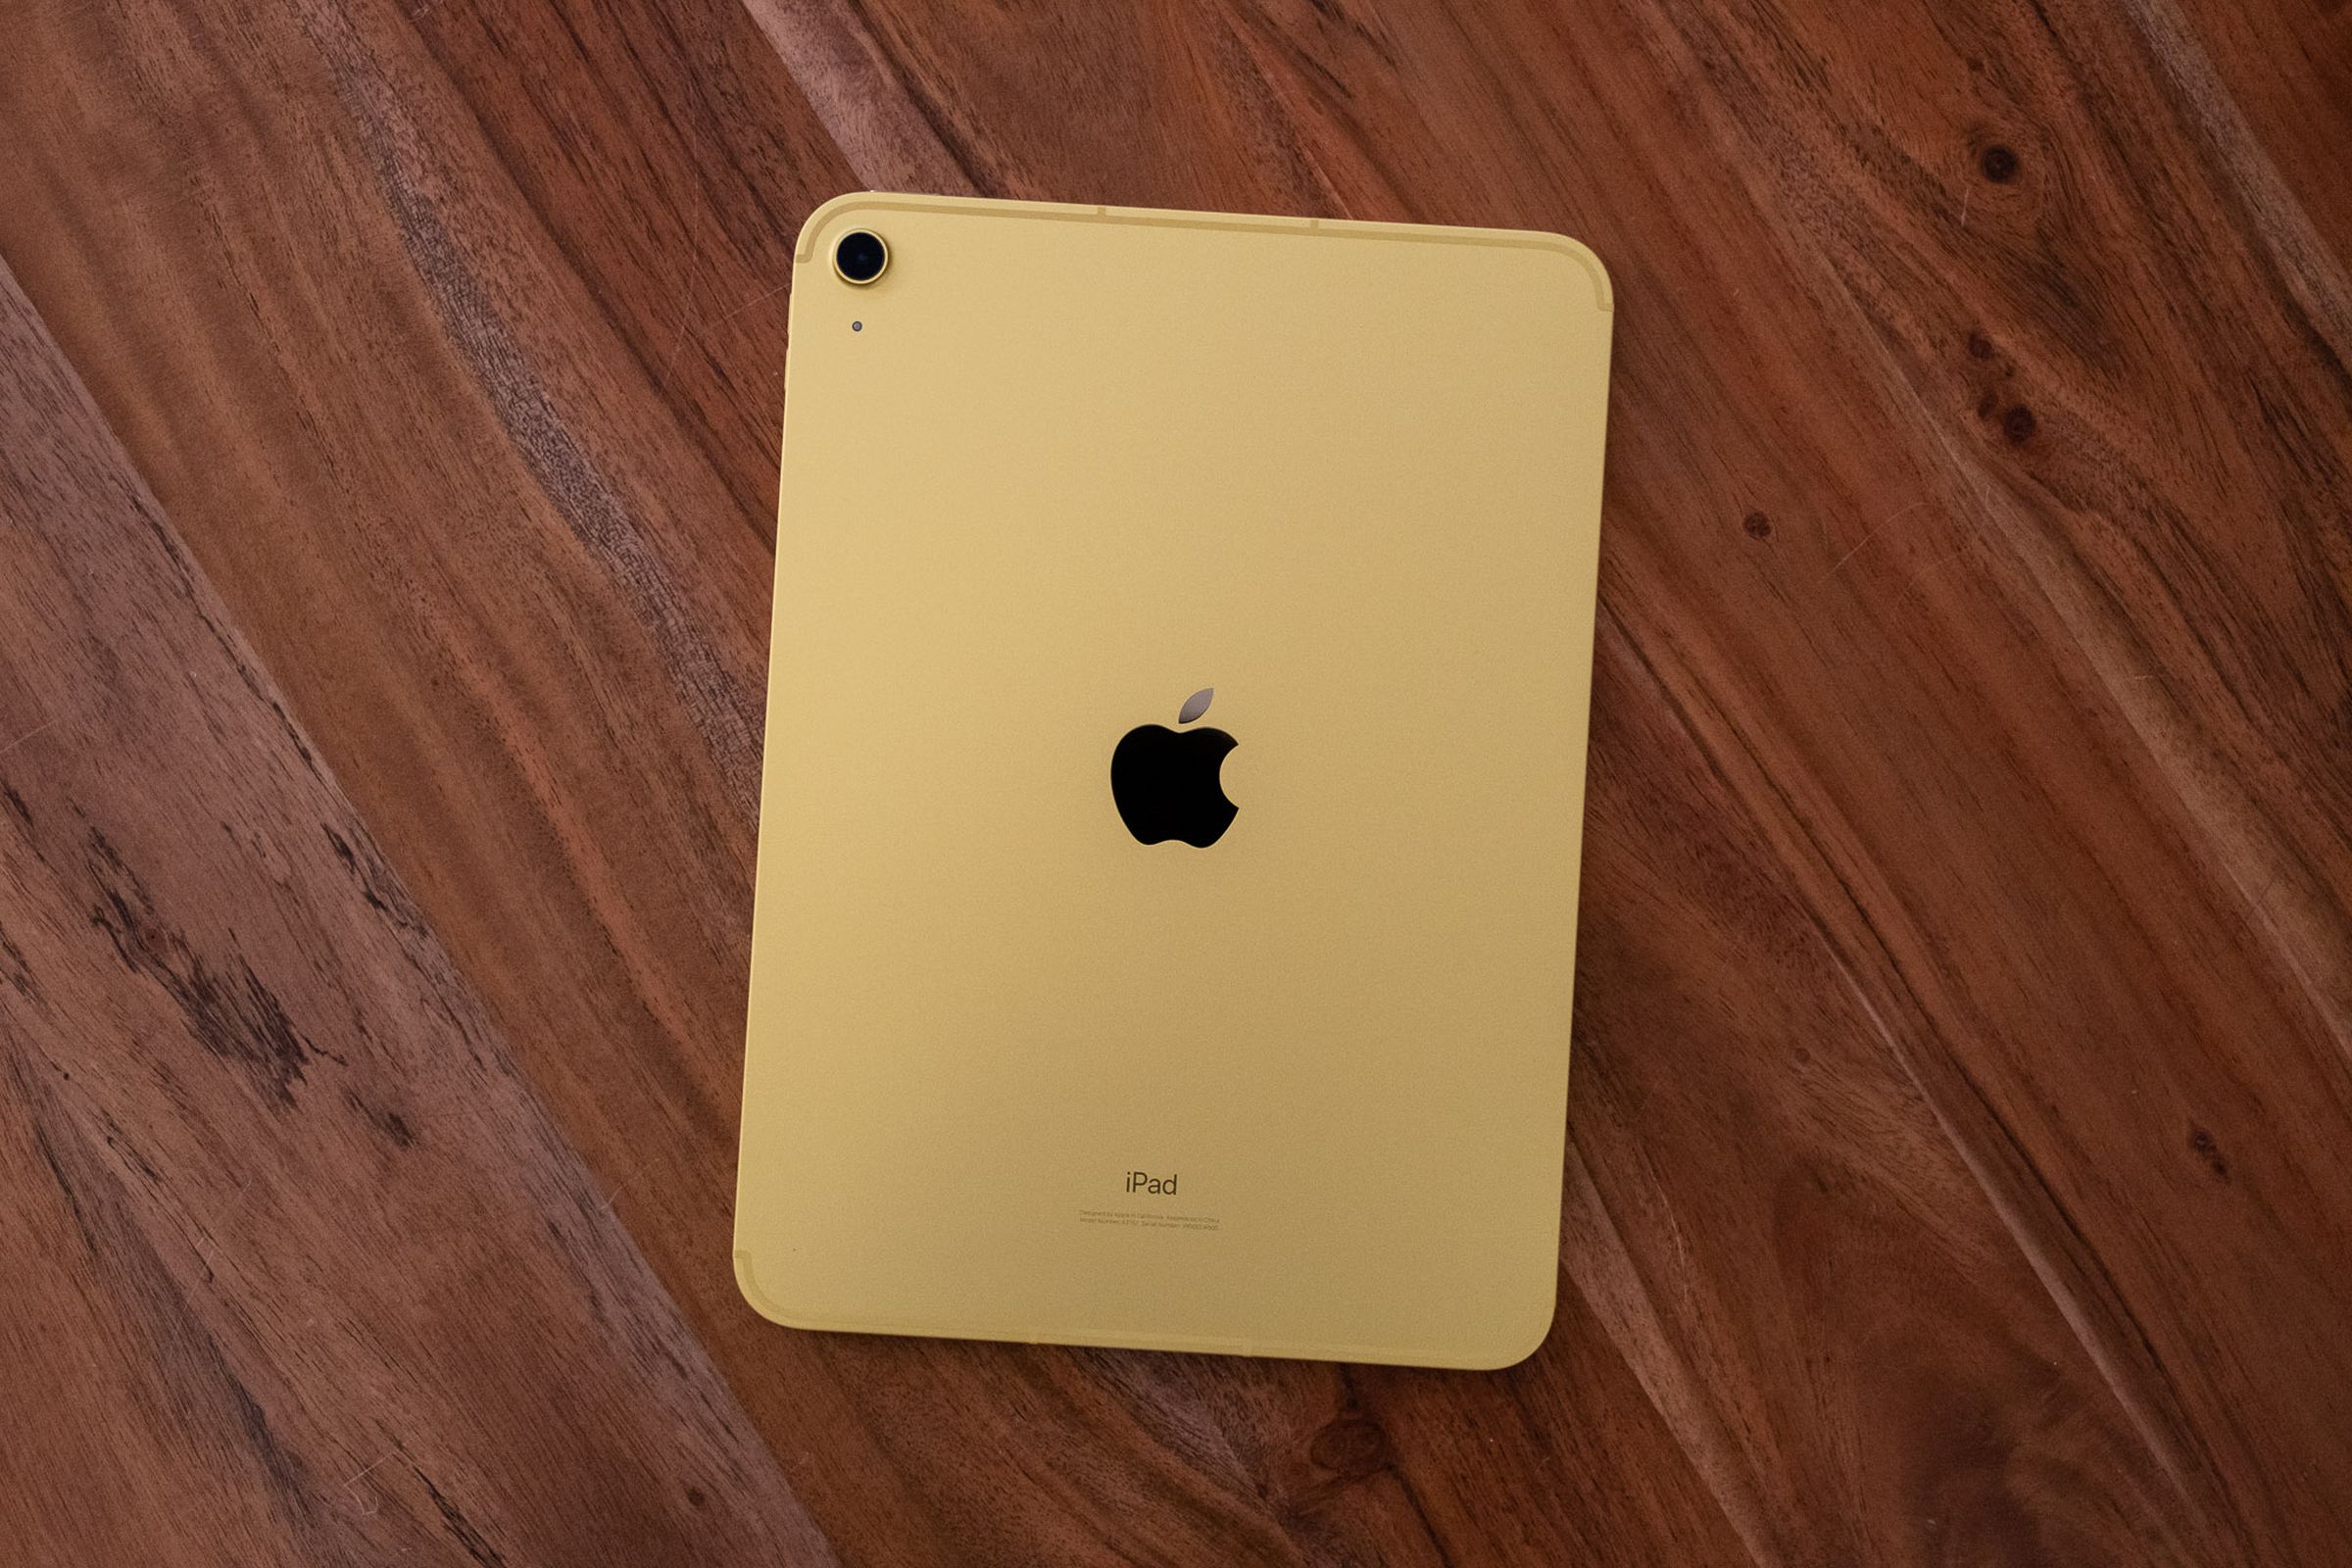 A yellow 10th gen iPad face down on a wooden table, seen from above.